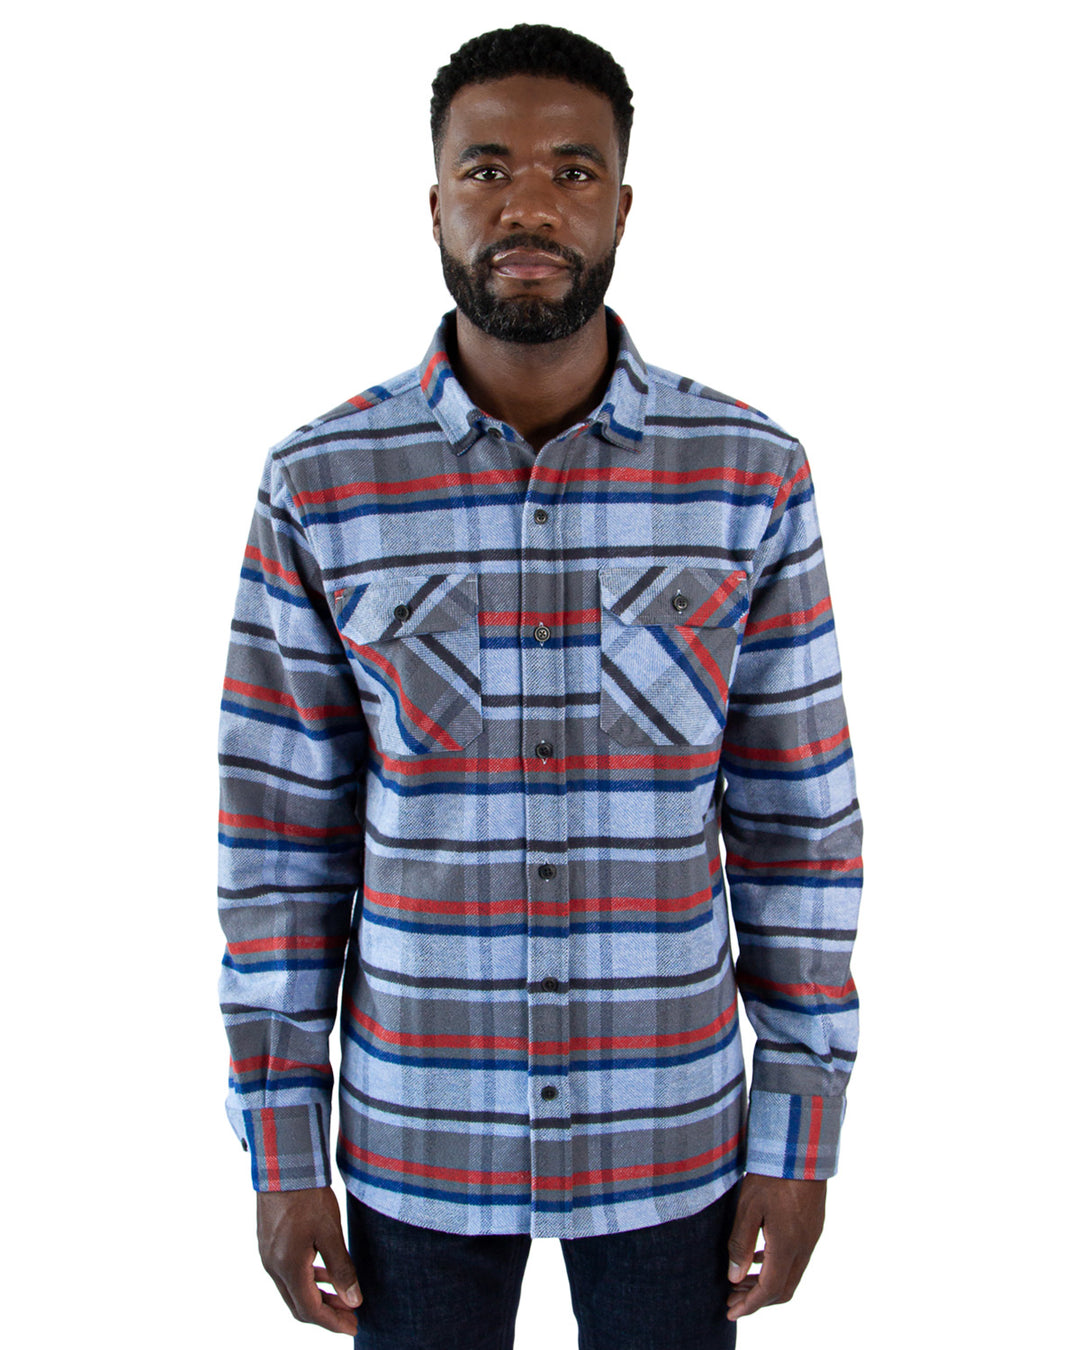 Grand Flannel in Dust Blue Plaid, 100% Cotton Flannel Shirt for Men by MuskOx